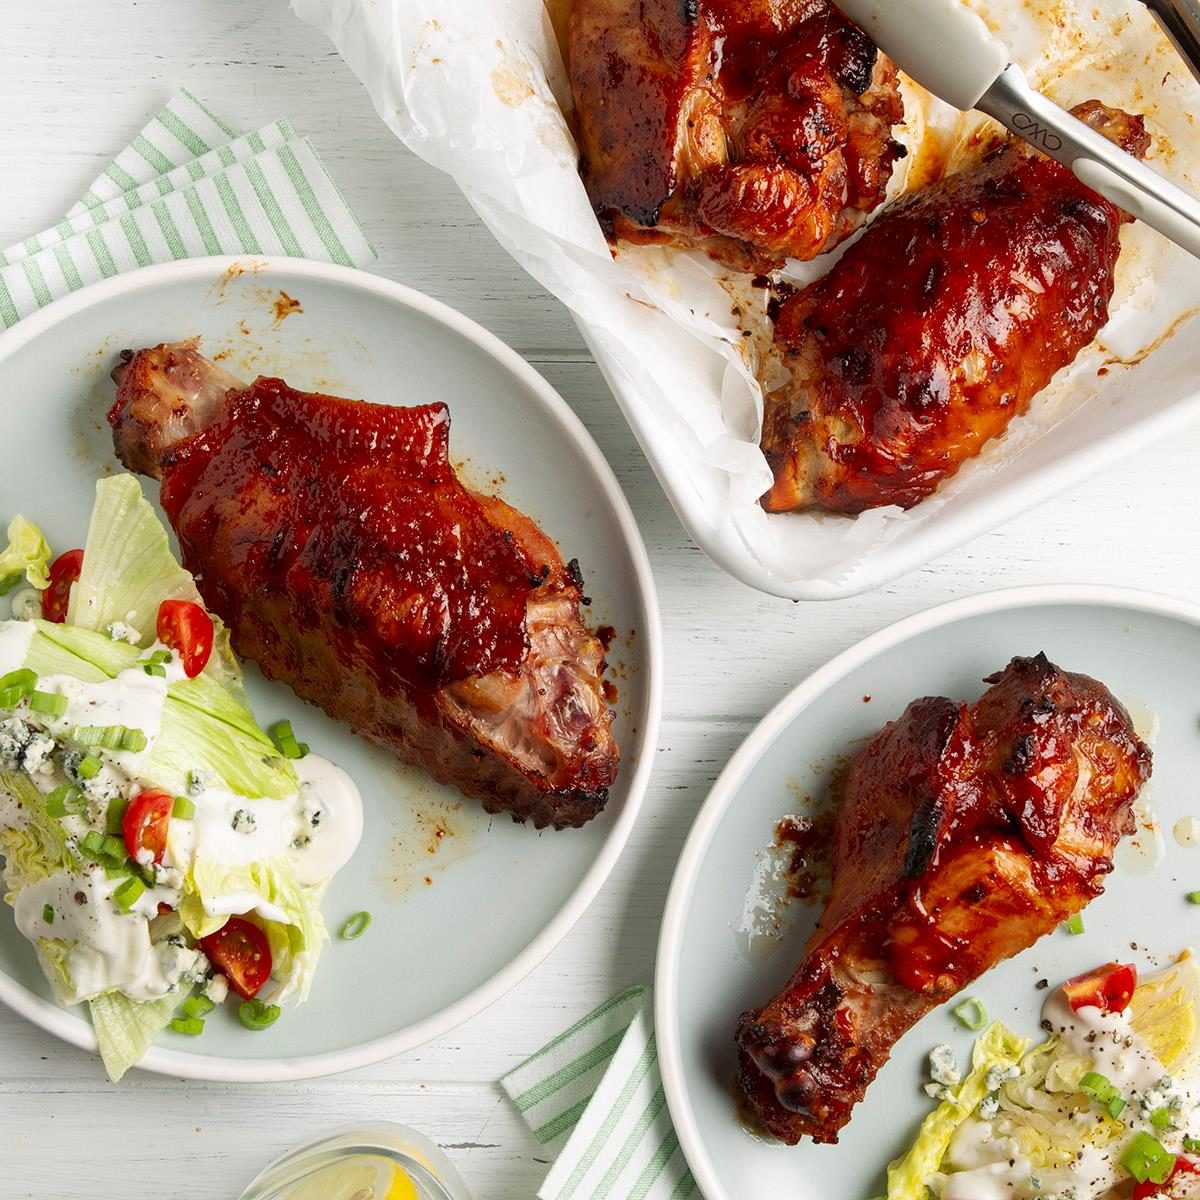 https://www.tasteofhome.com/wp-content/uploads/2018/01/Barbecue-Turkey-Wings_EXPS_FT21_22790_F_0518_1.jpg